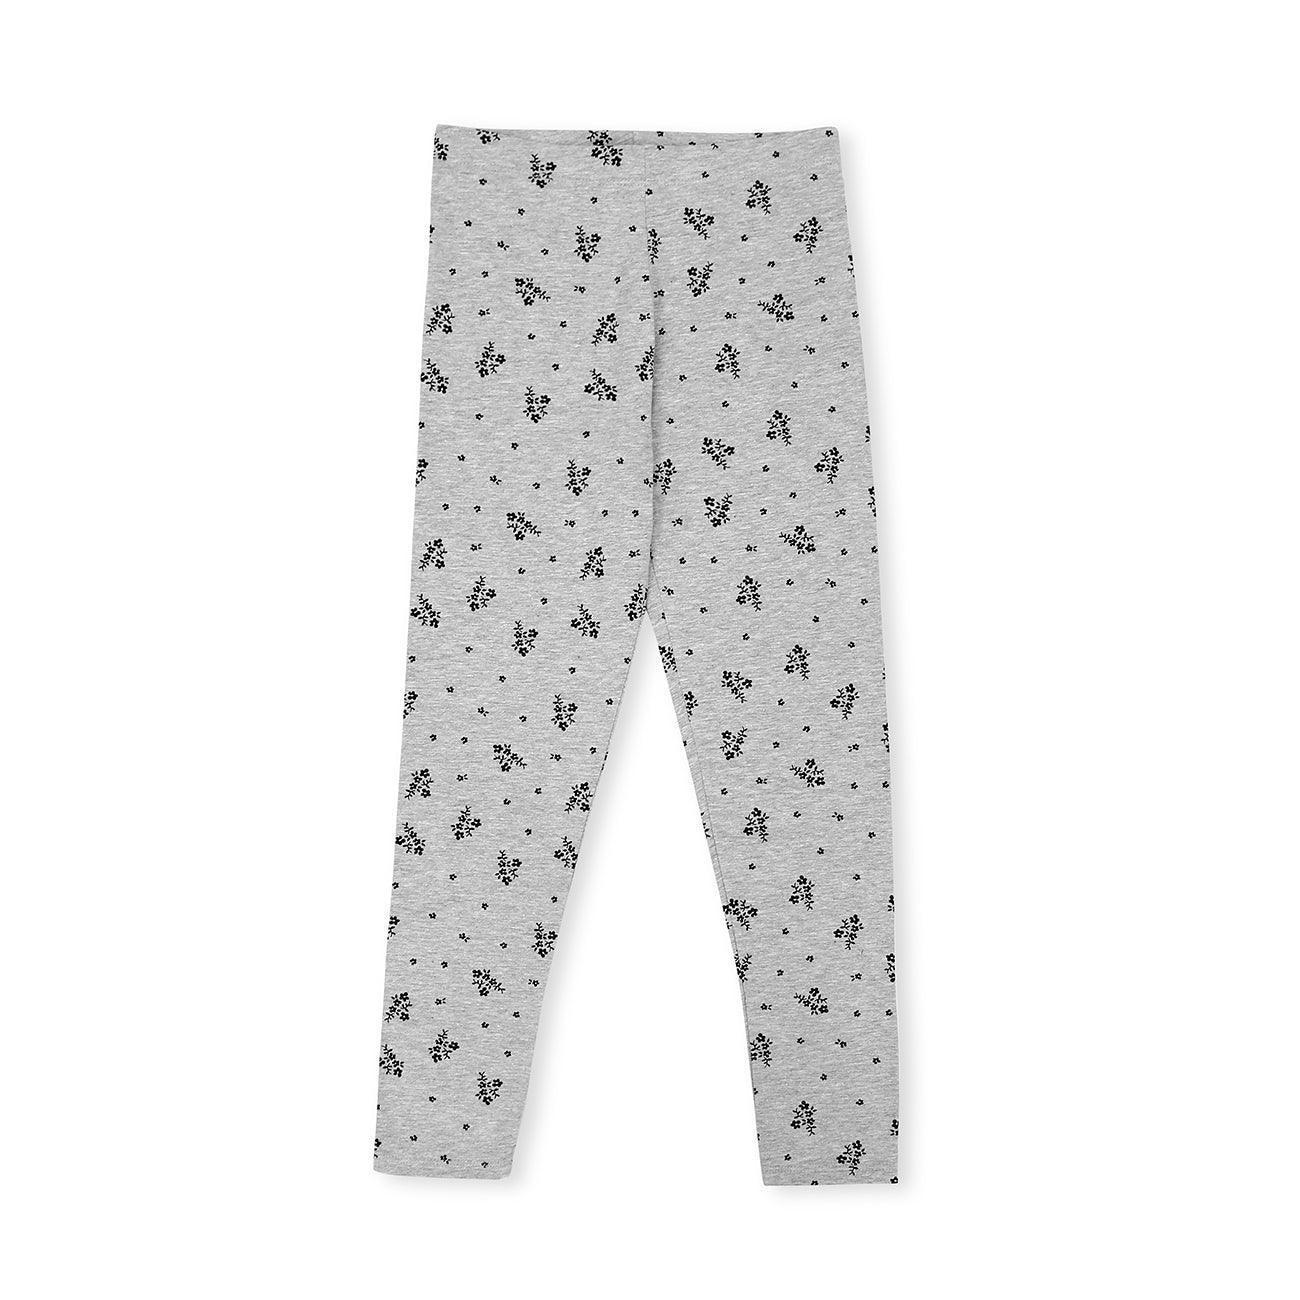 Imported All-Over Printed Soft Cotton Legging For Girls 10 YRS - 13-14 YRS (LE-11542) - Brands River